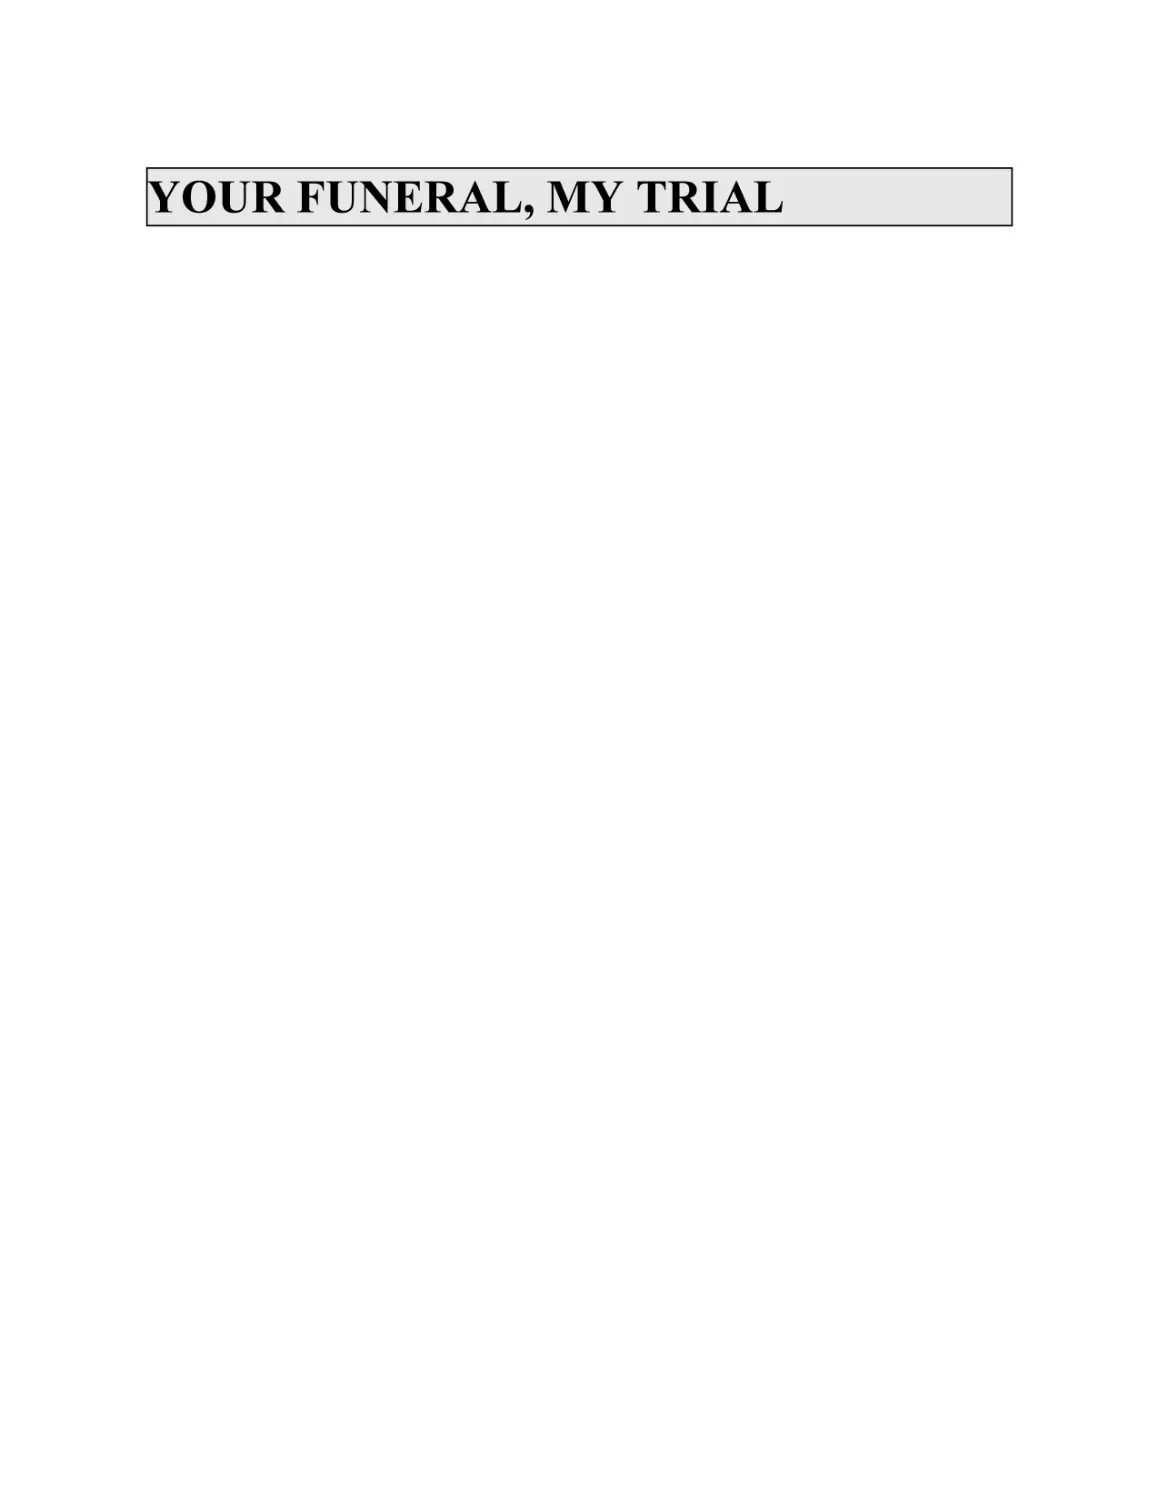 YOUR FUNERAL, MY TRIAL